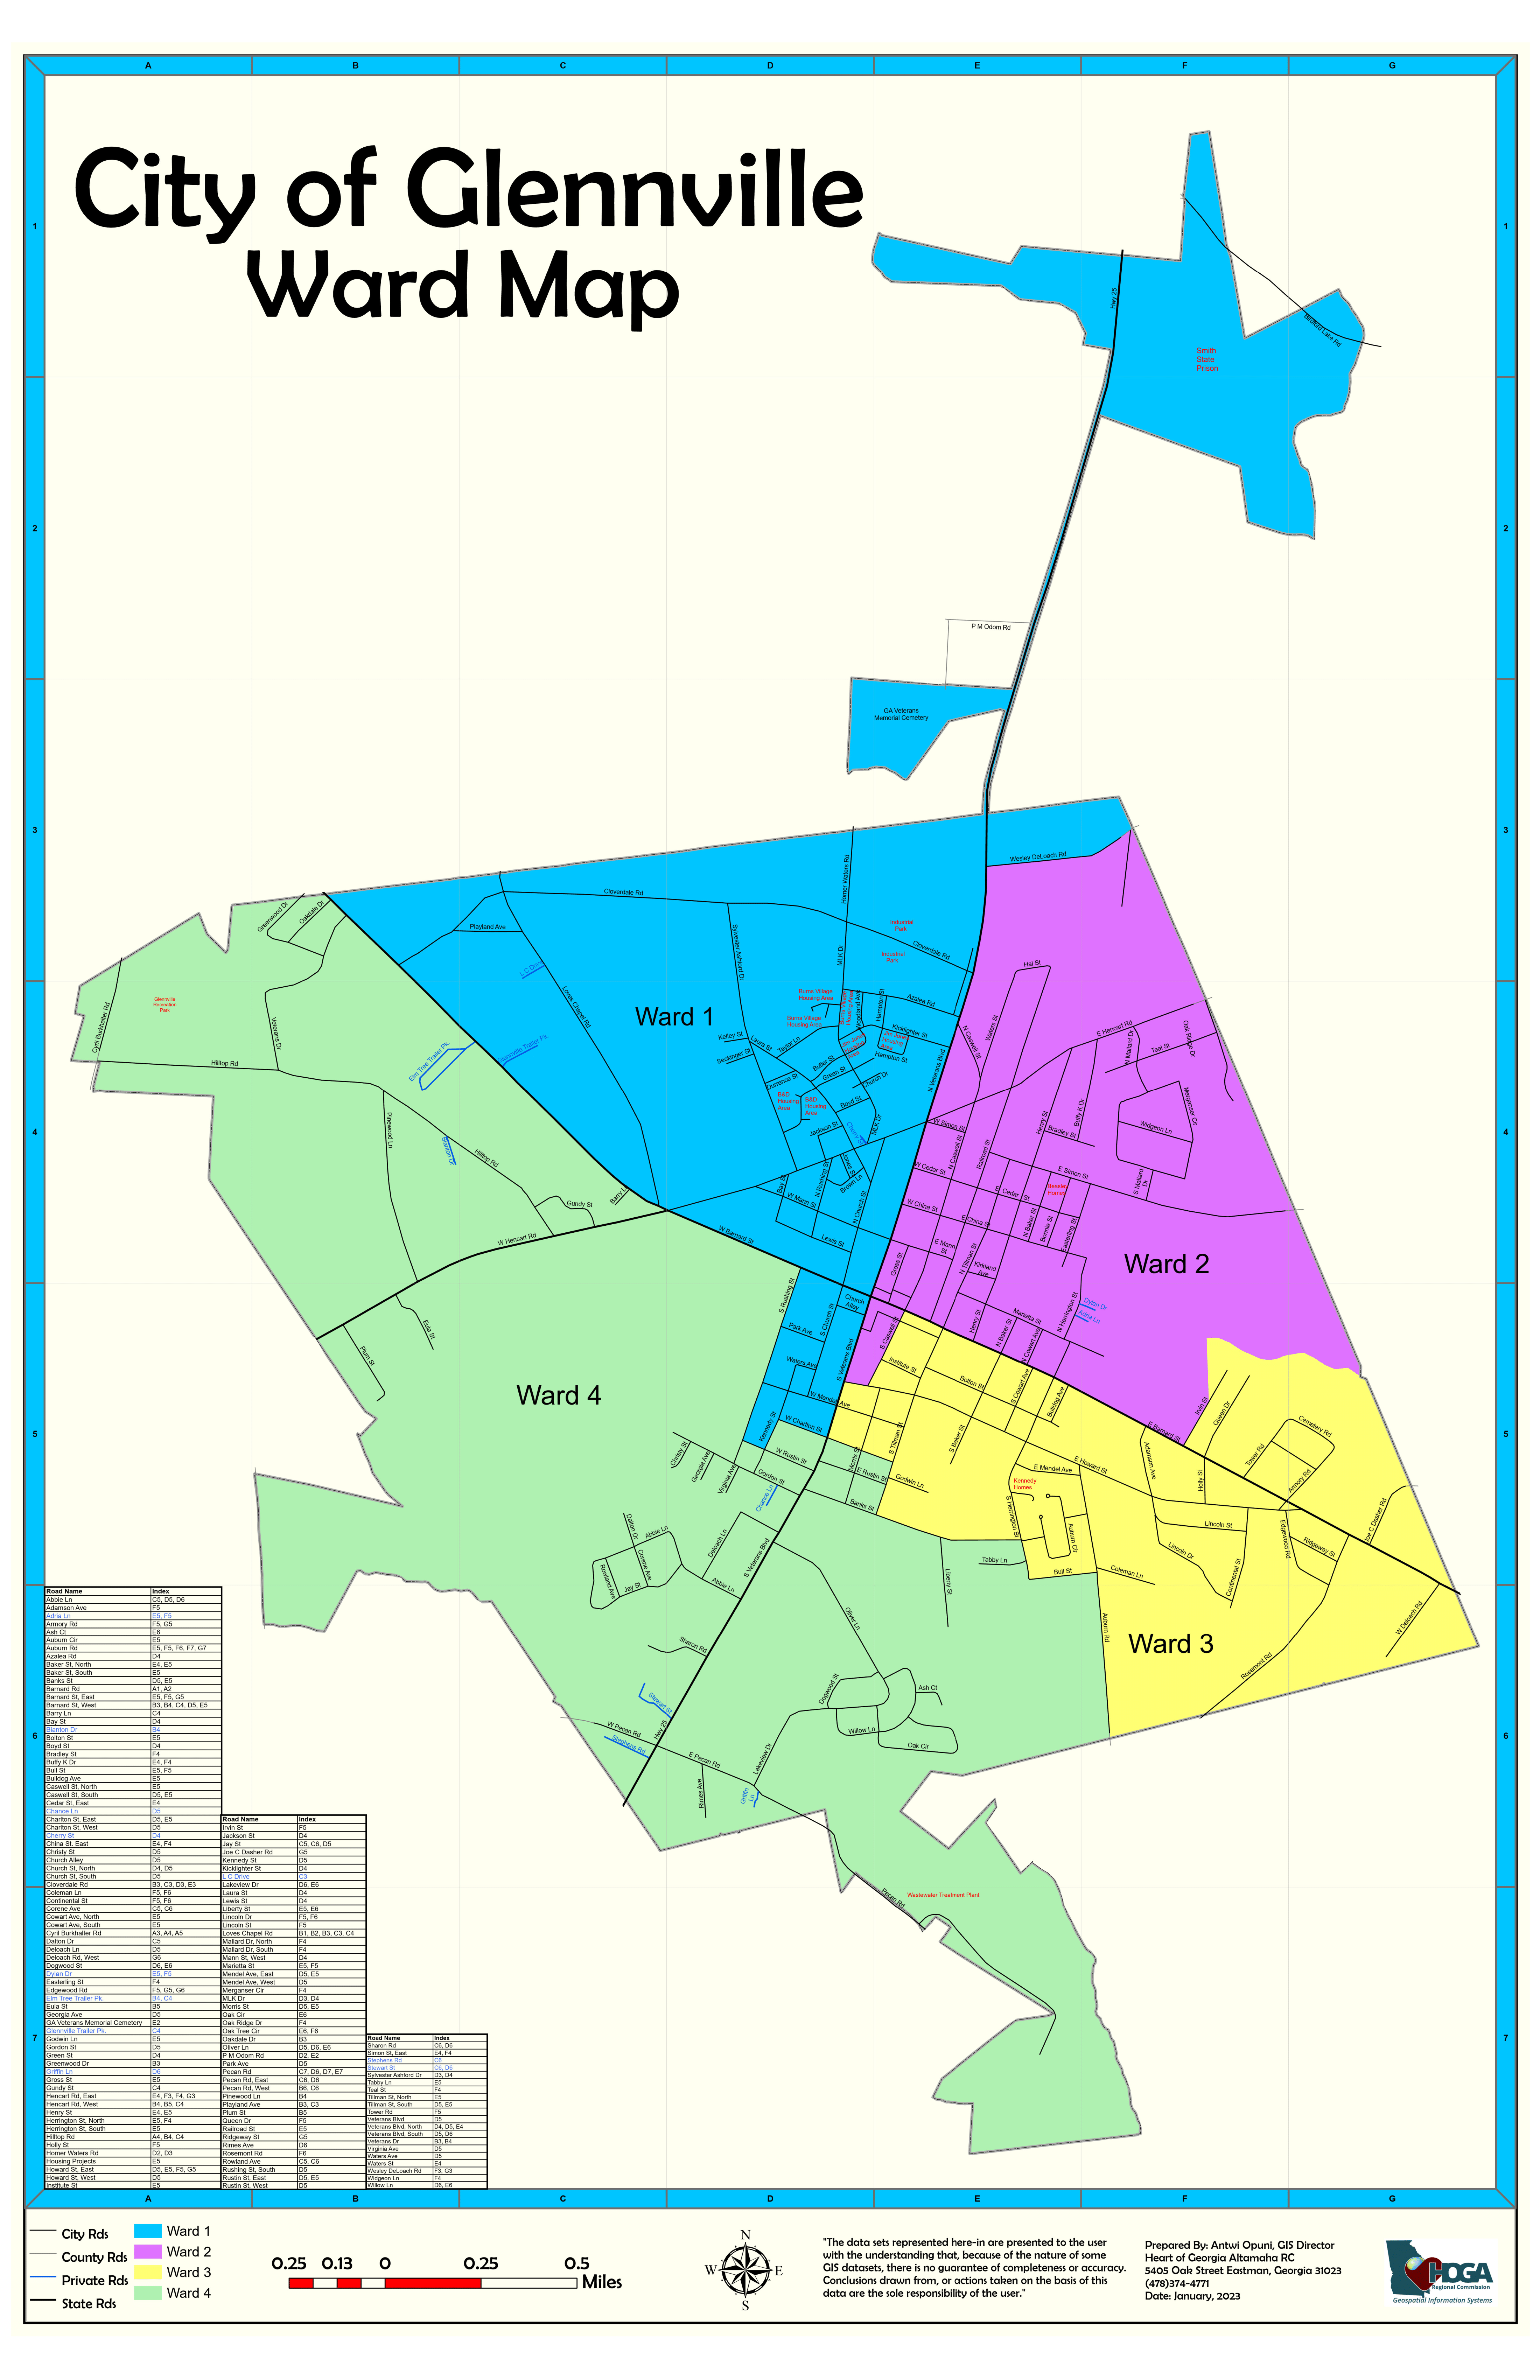 this is a map of the 4 wards in the city of glennville